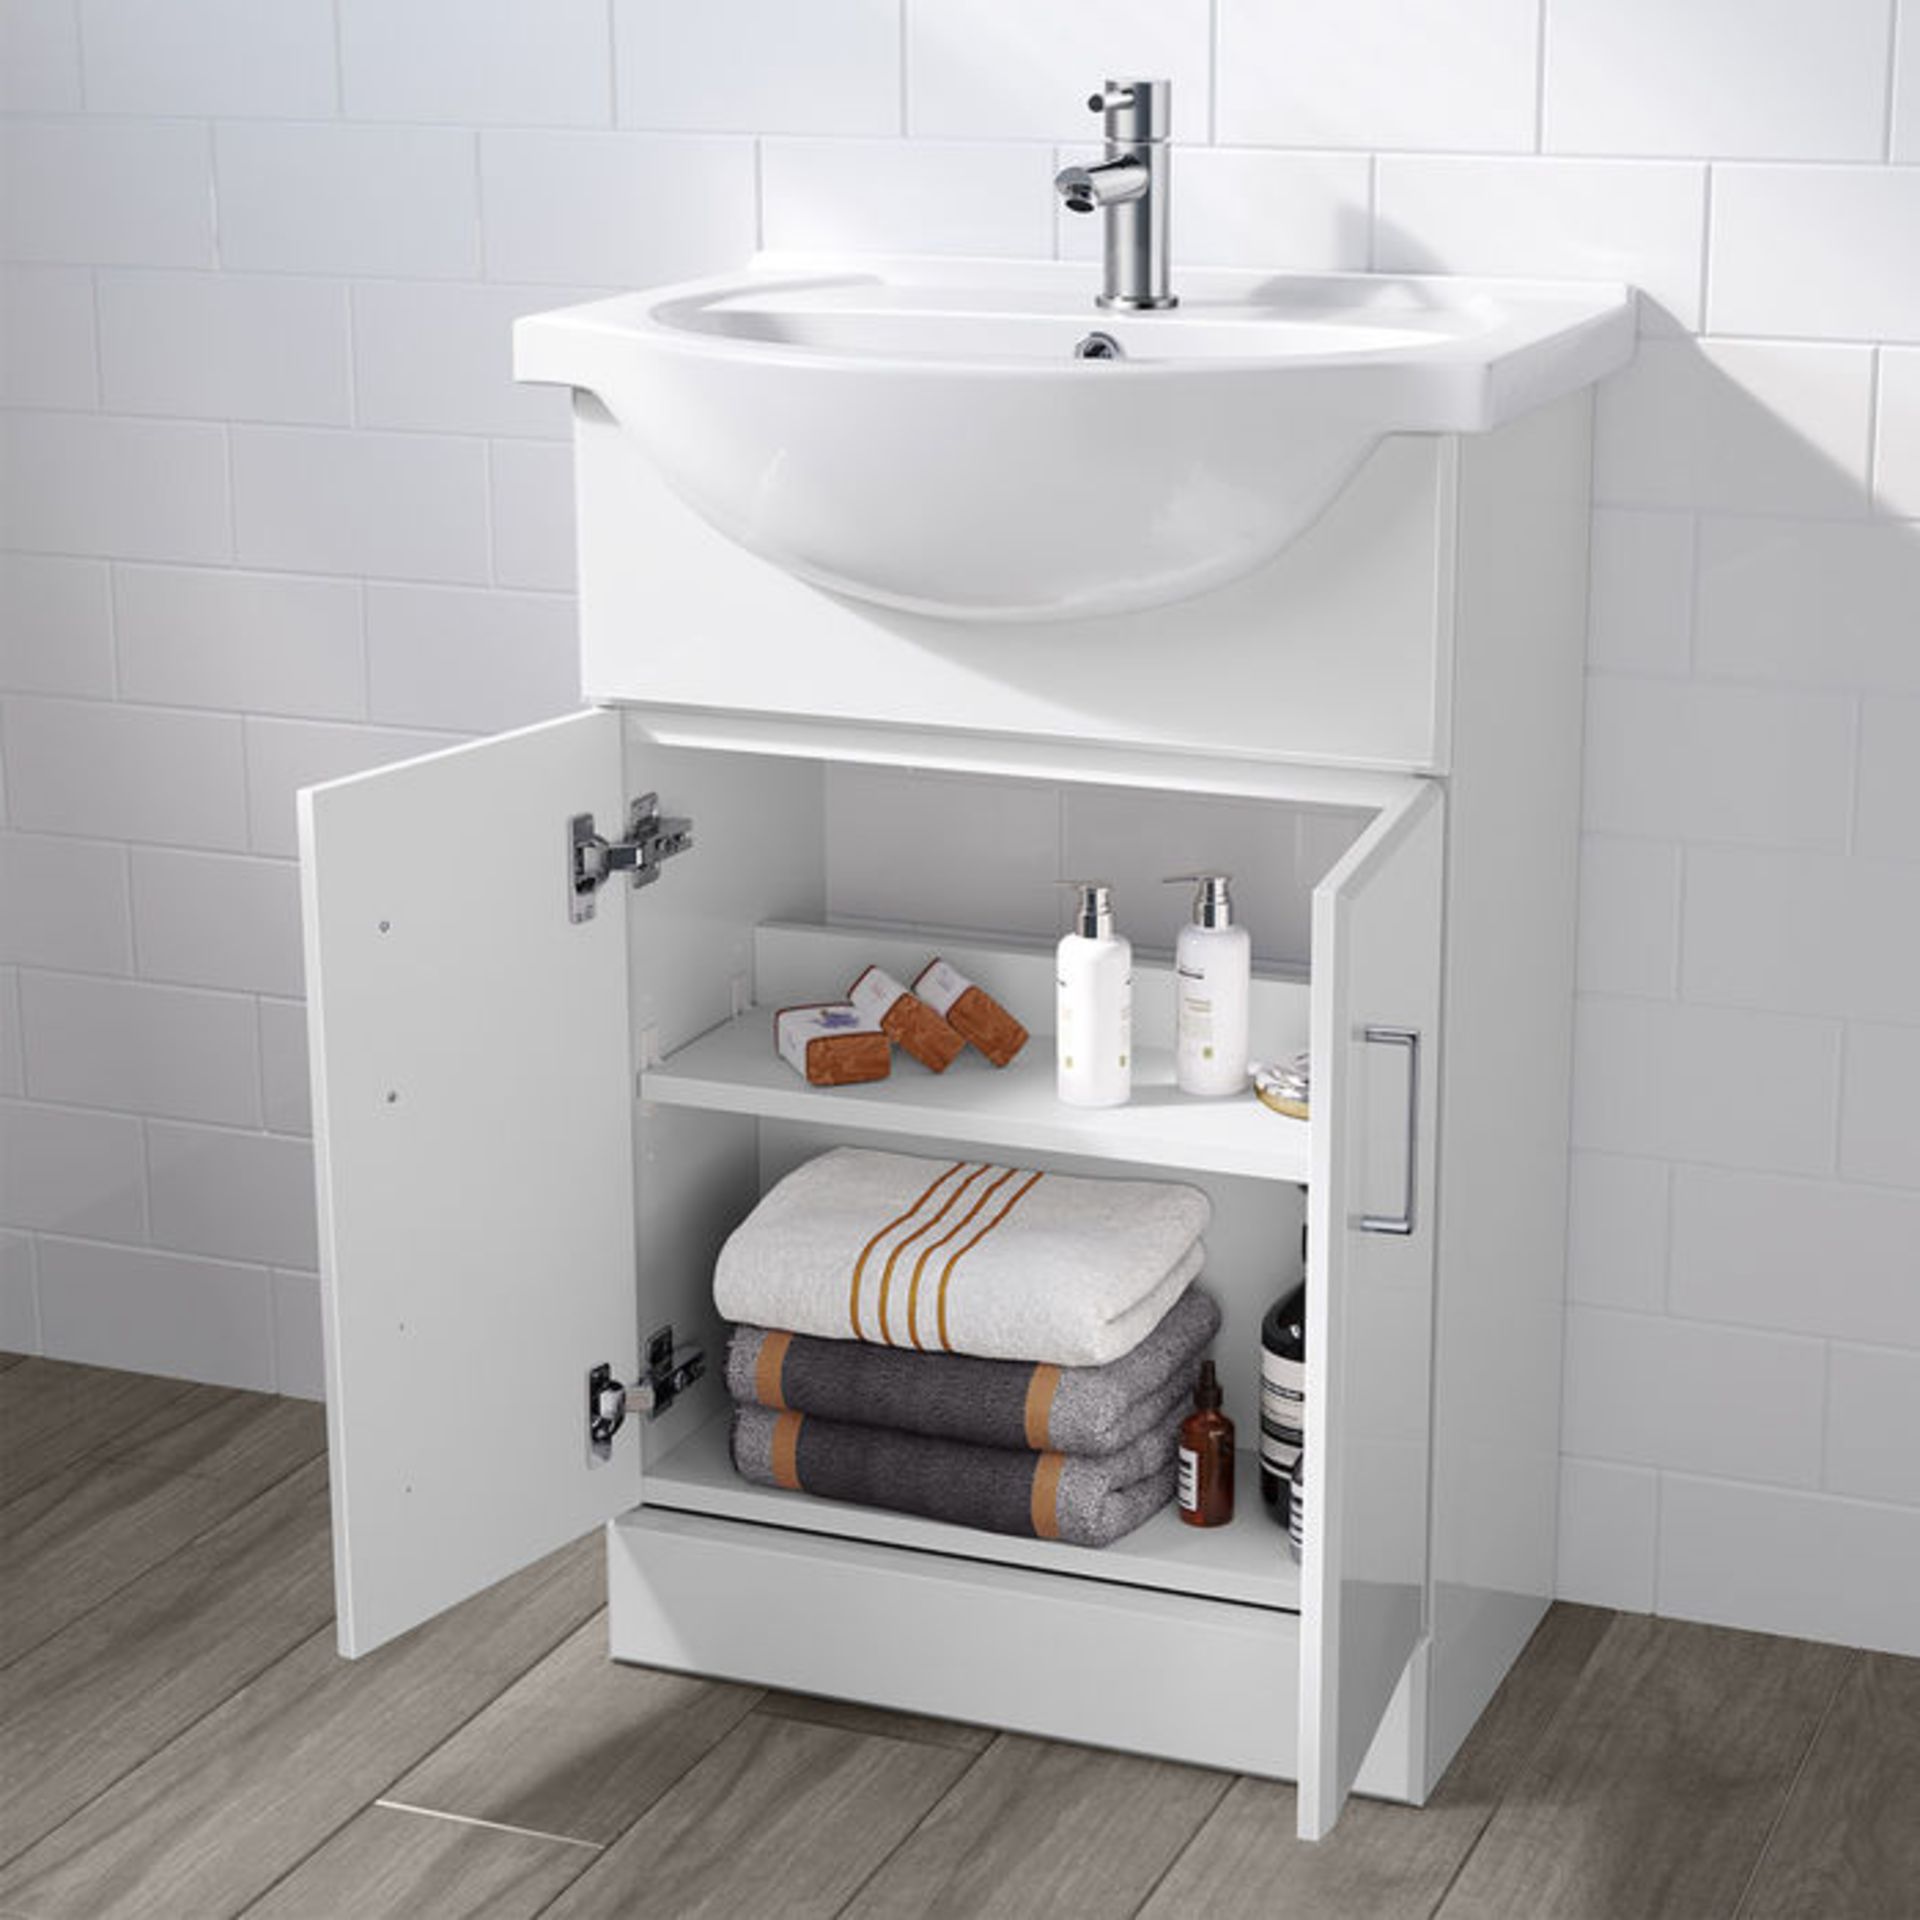 (YC50) 550x300mm Quartz Gloss White Built In Basin Cabinet. RRP £349.99. Comes complete with - Image 2 of 4